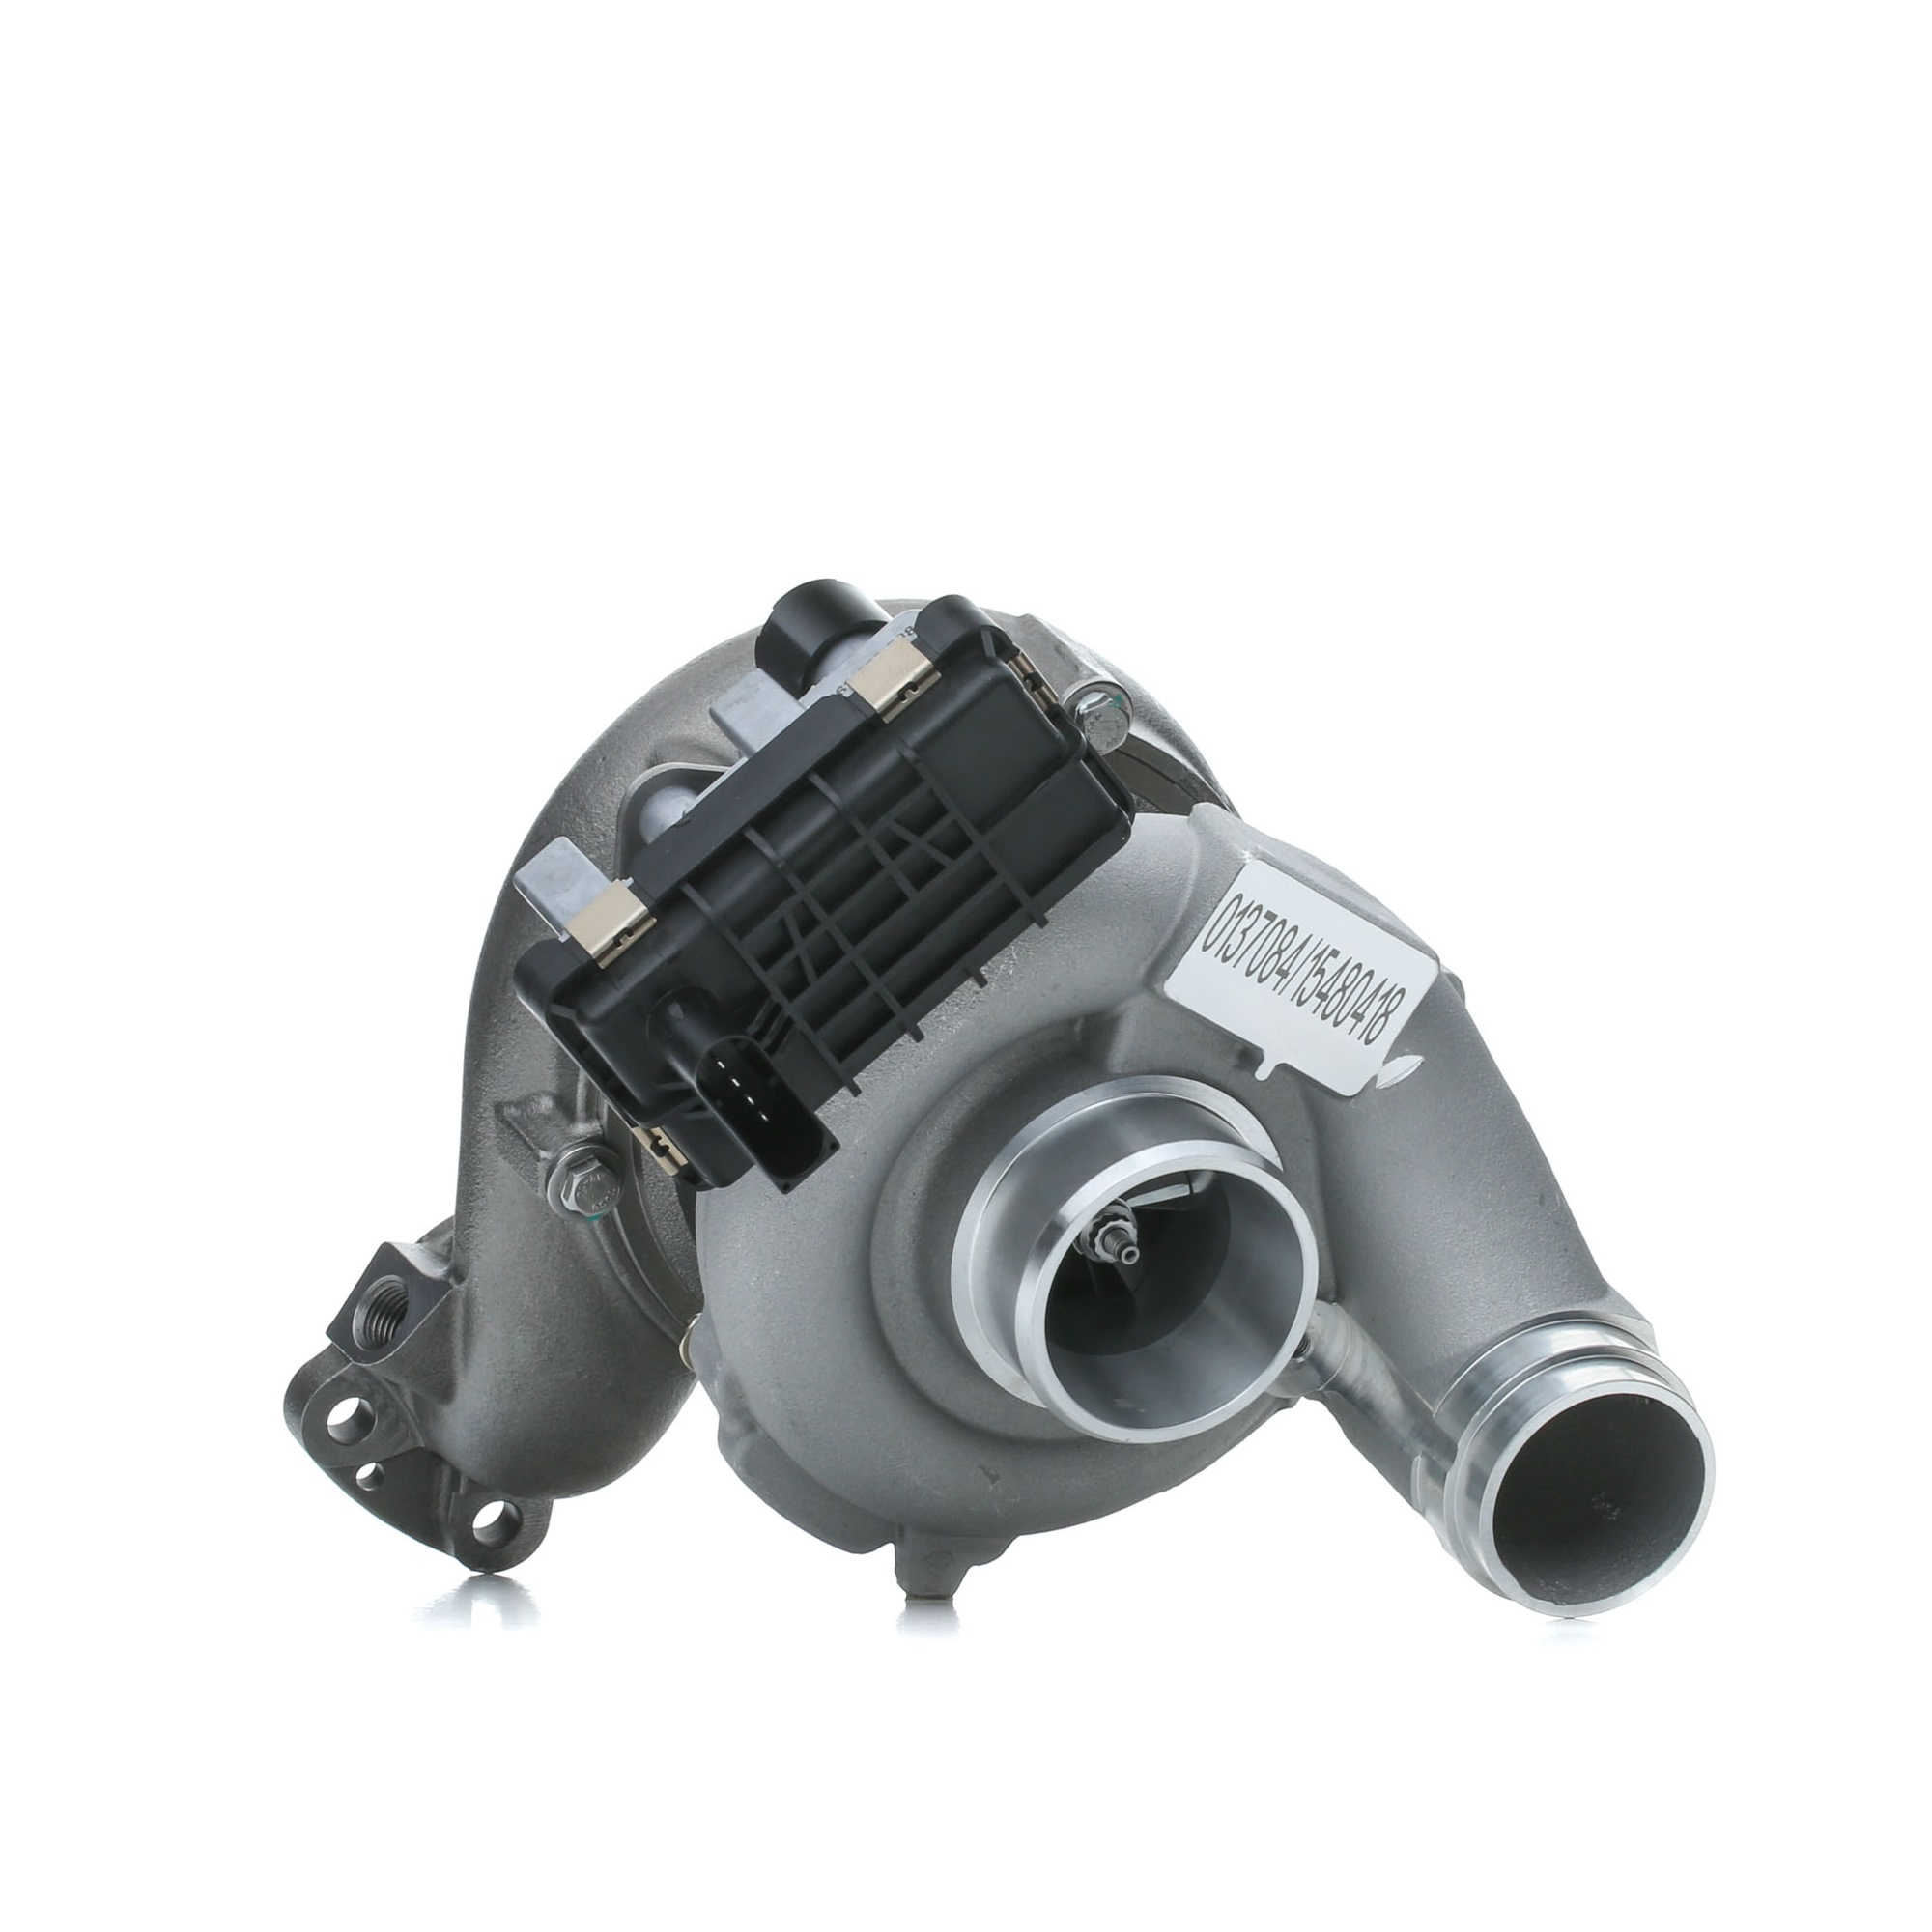 STARK SKCT-1190337 Turbocharger Exhaust Turbocharger, Electronic, Incl. Gasket Set, with gaskets/seals